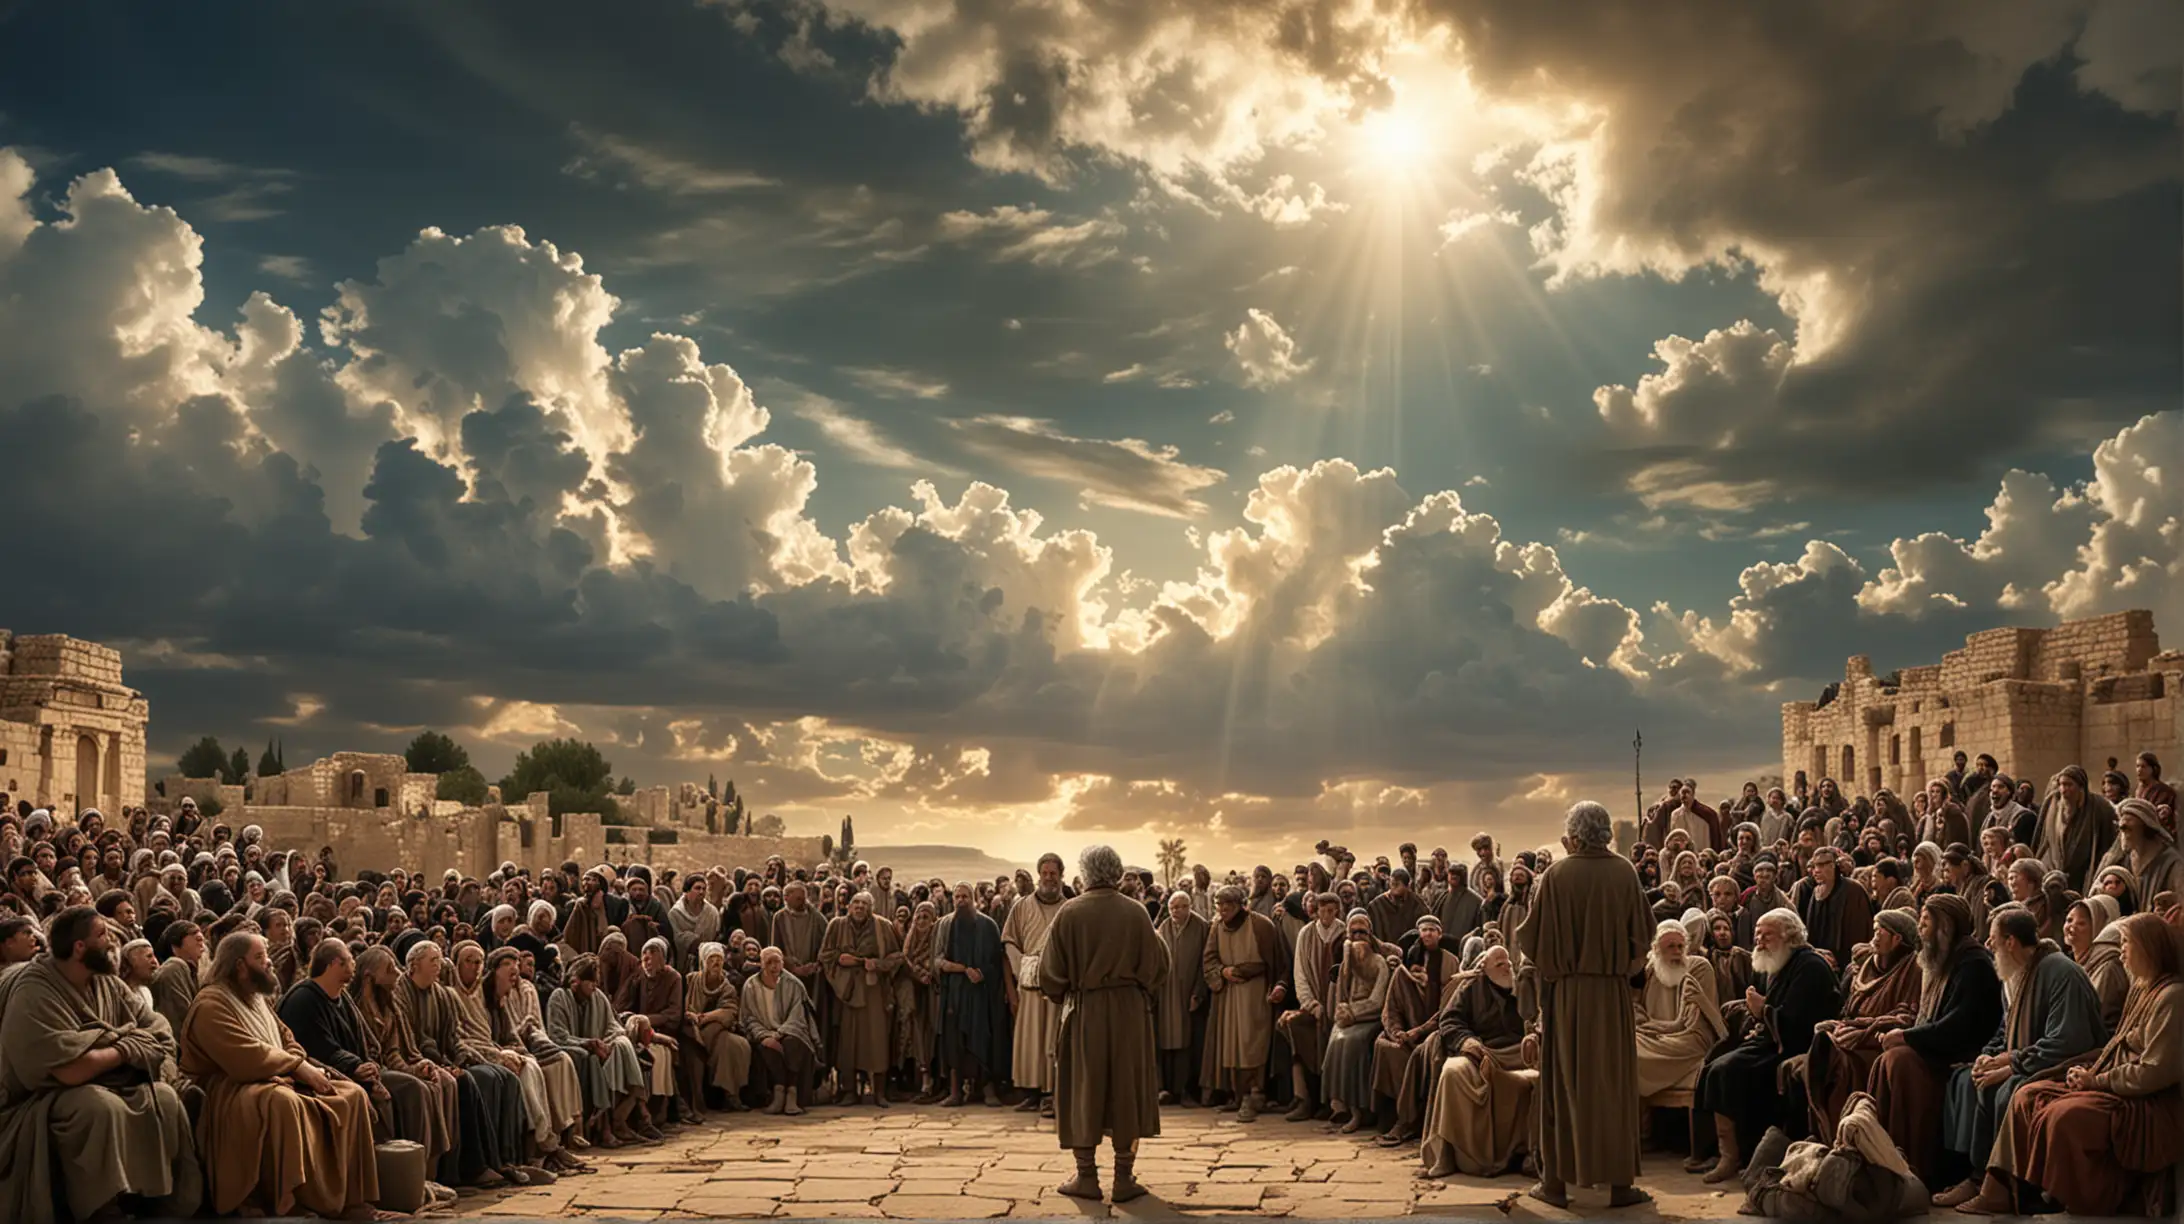 a crowd of people listening to an old man. In the background, a magnificent sky.  Set during the Biblical era of King David.